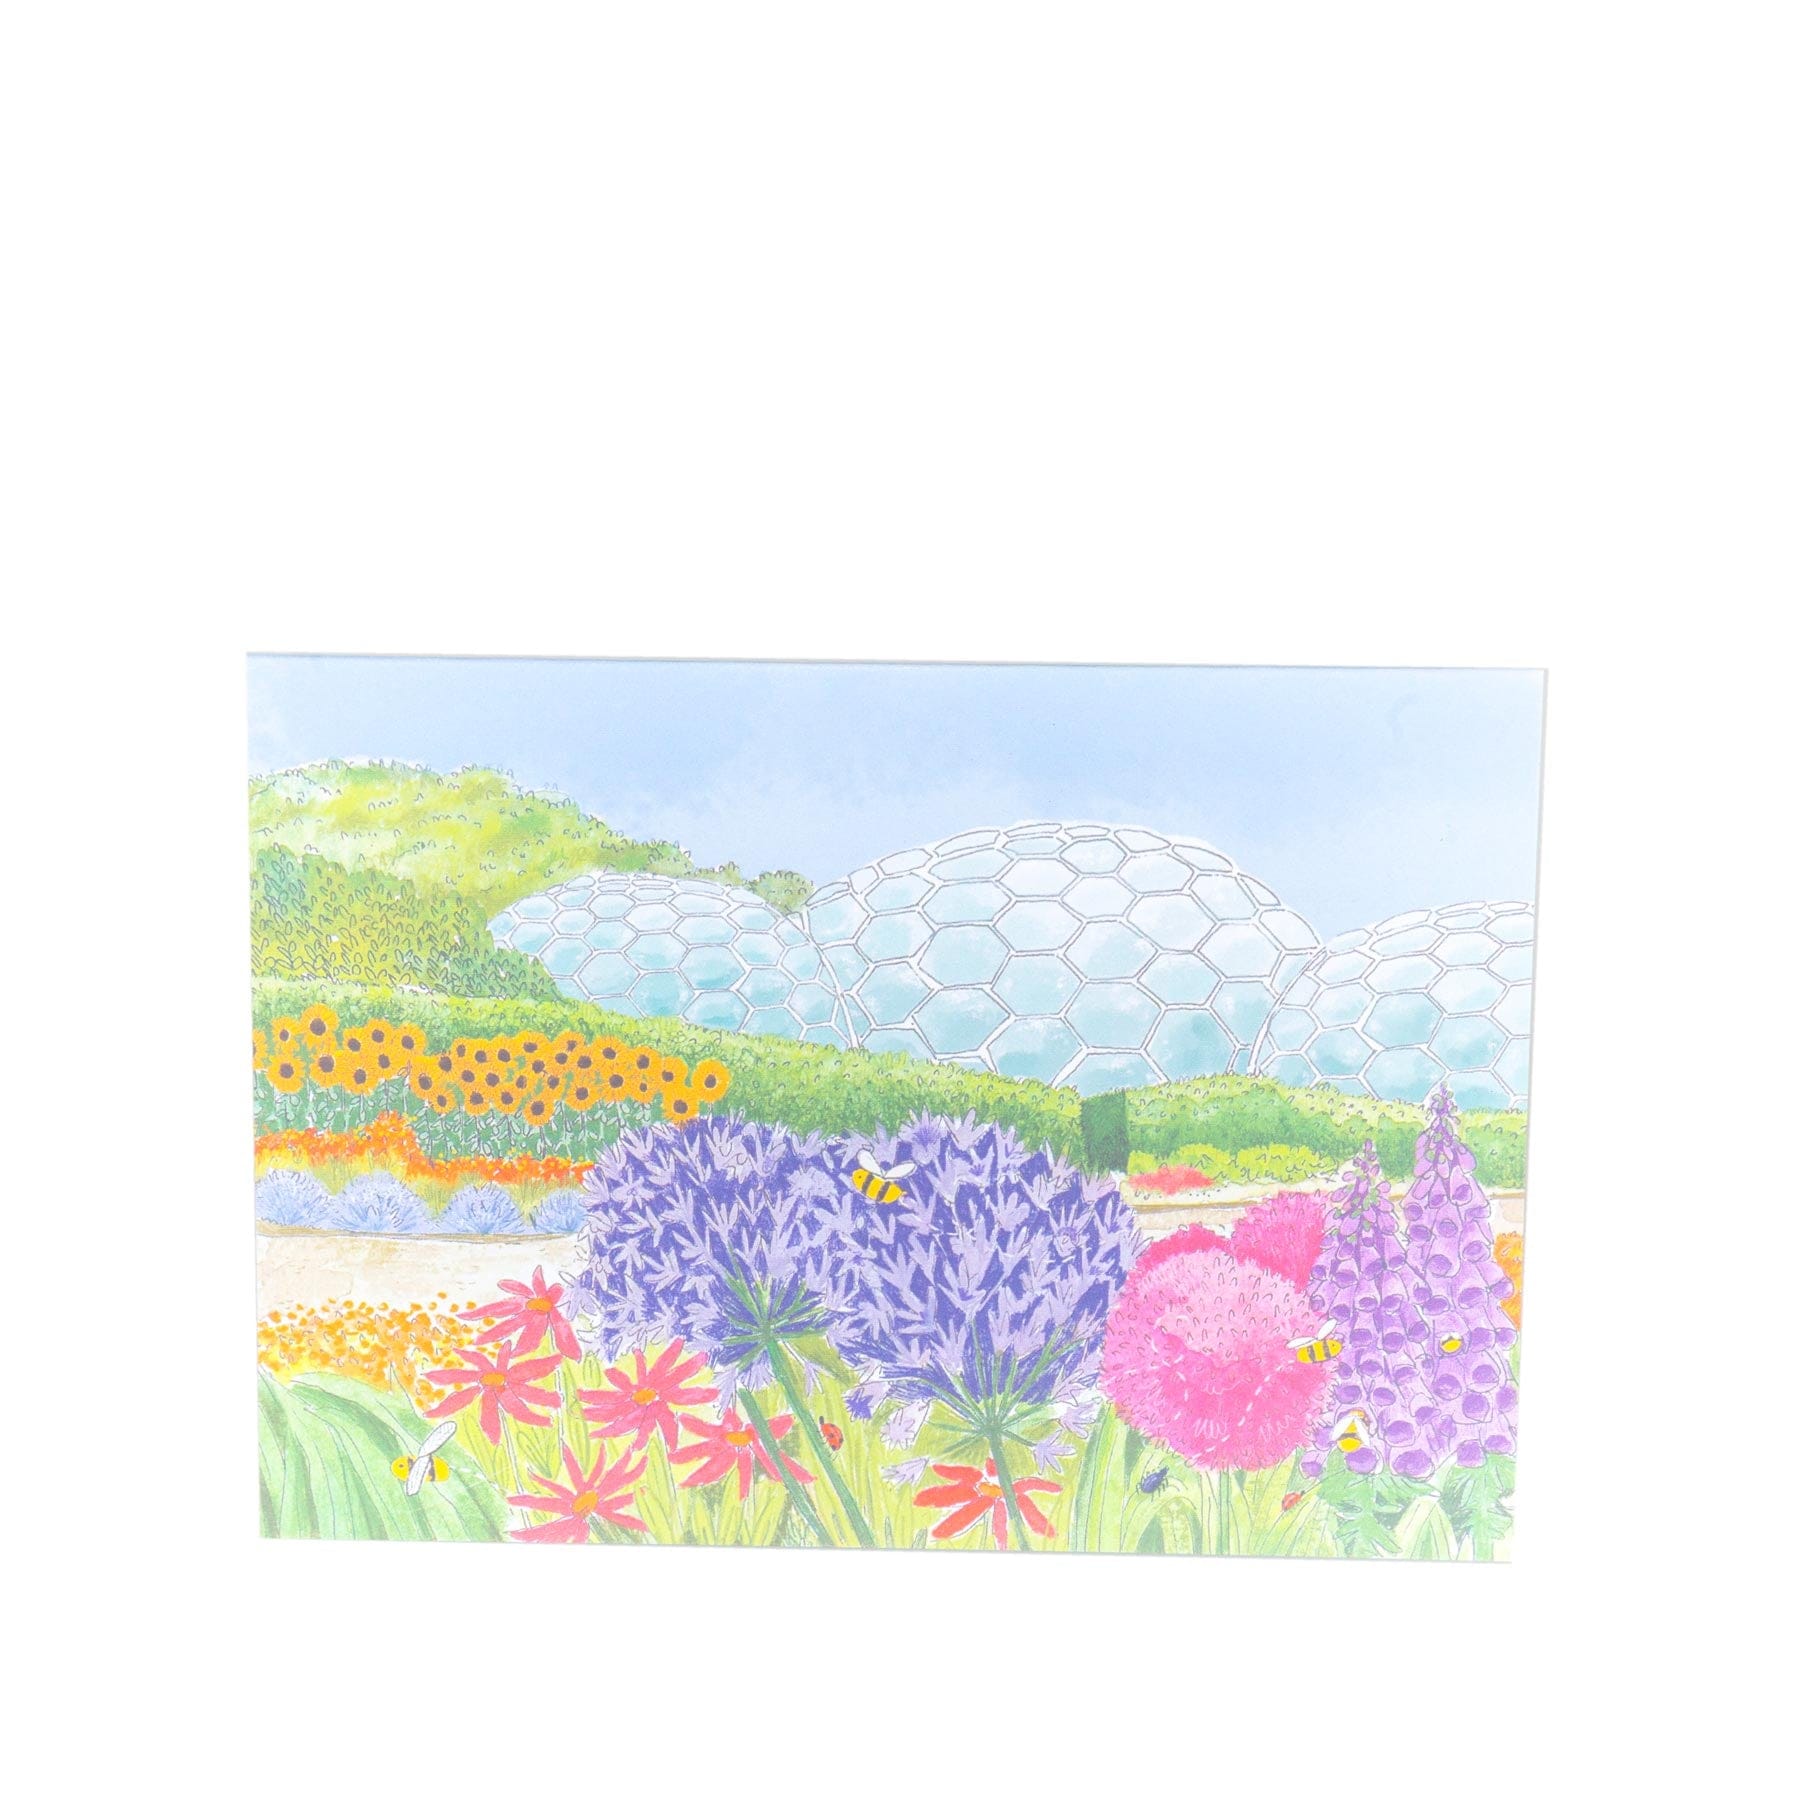 Eden Project biomes and bees card